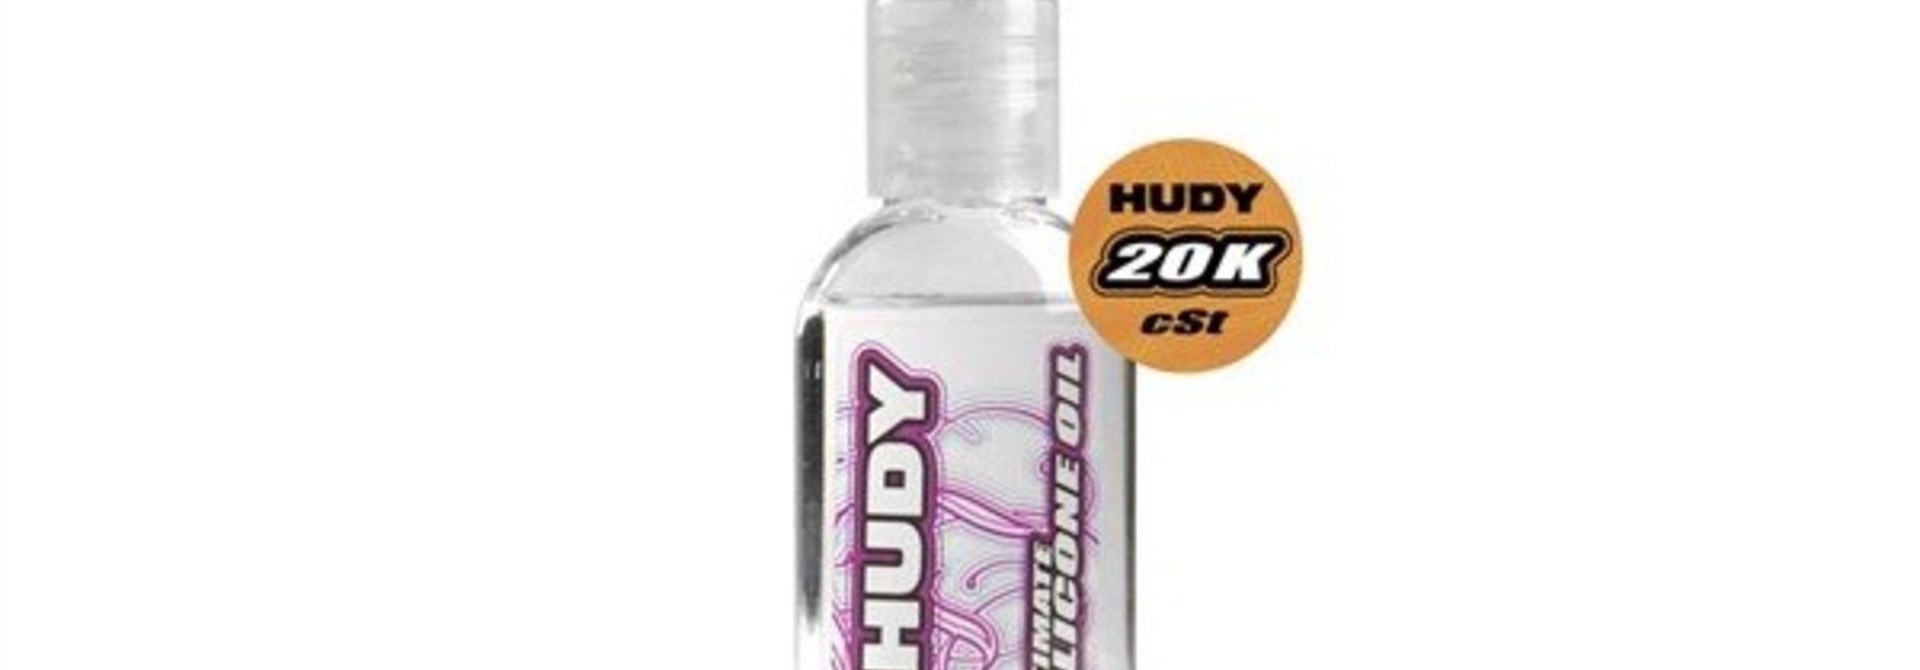 HUDY ULTIMATE SILICONE OIL 20 000 cSt - 50ML. H106520